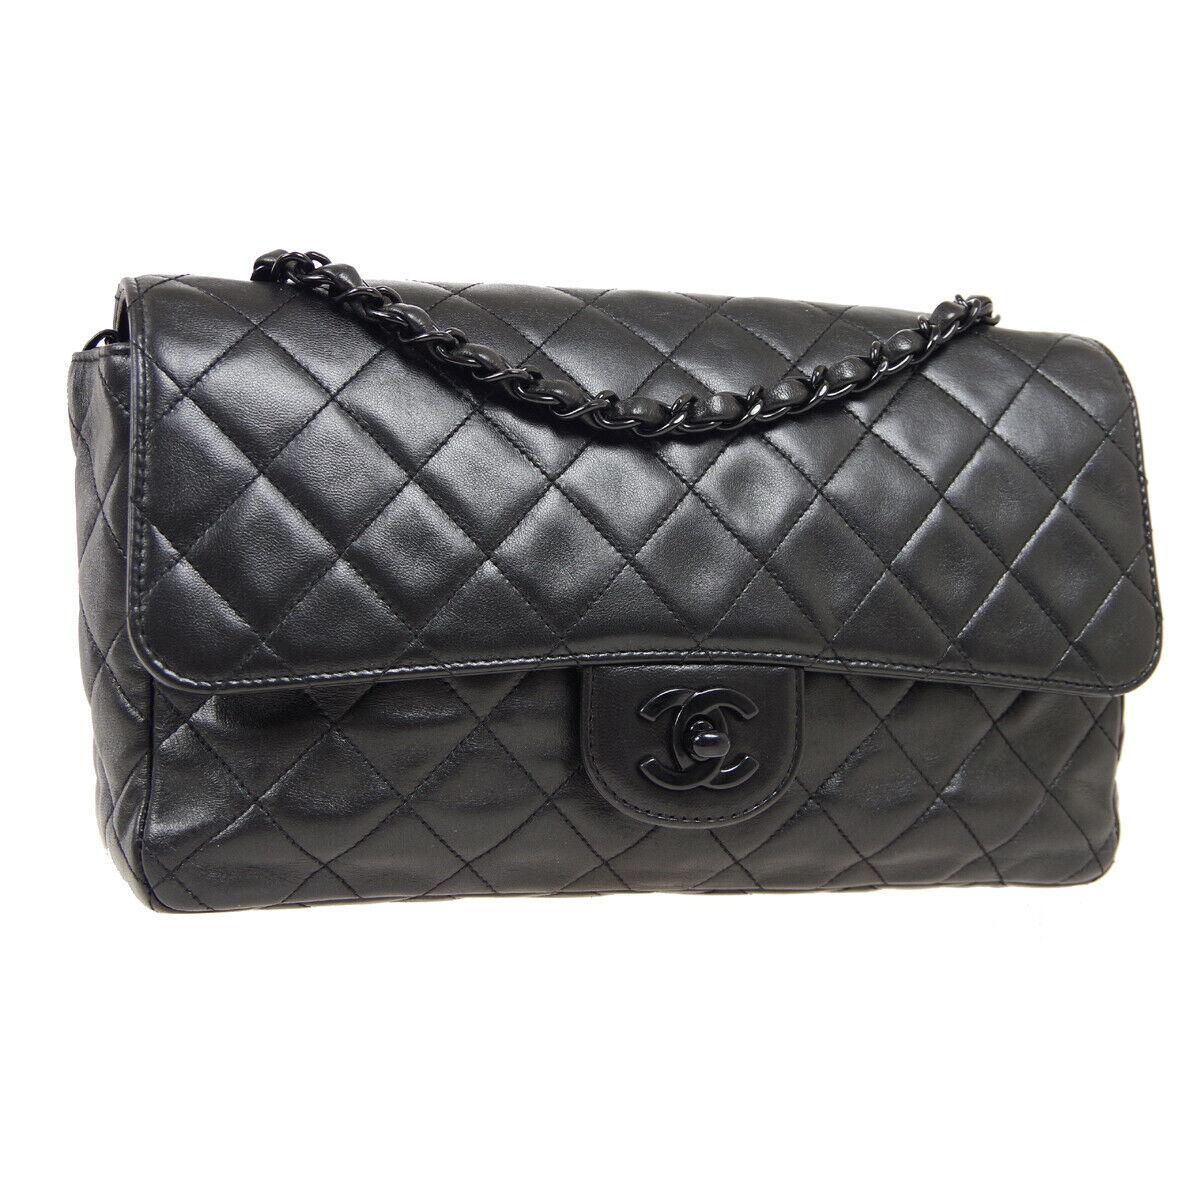 This iconic Chanel bag is crafted from quilted black lambskin and features a single flap. It also features the classic CC logo twist lock on the front flap. The black chain winded with leather can easily be carried as a shoulder bag with a double or